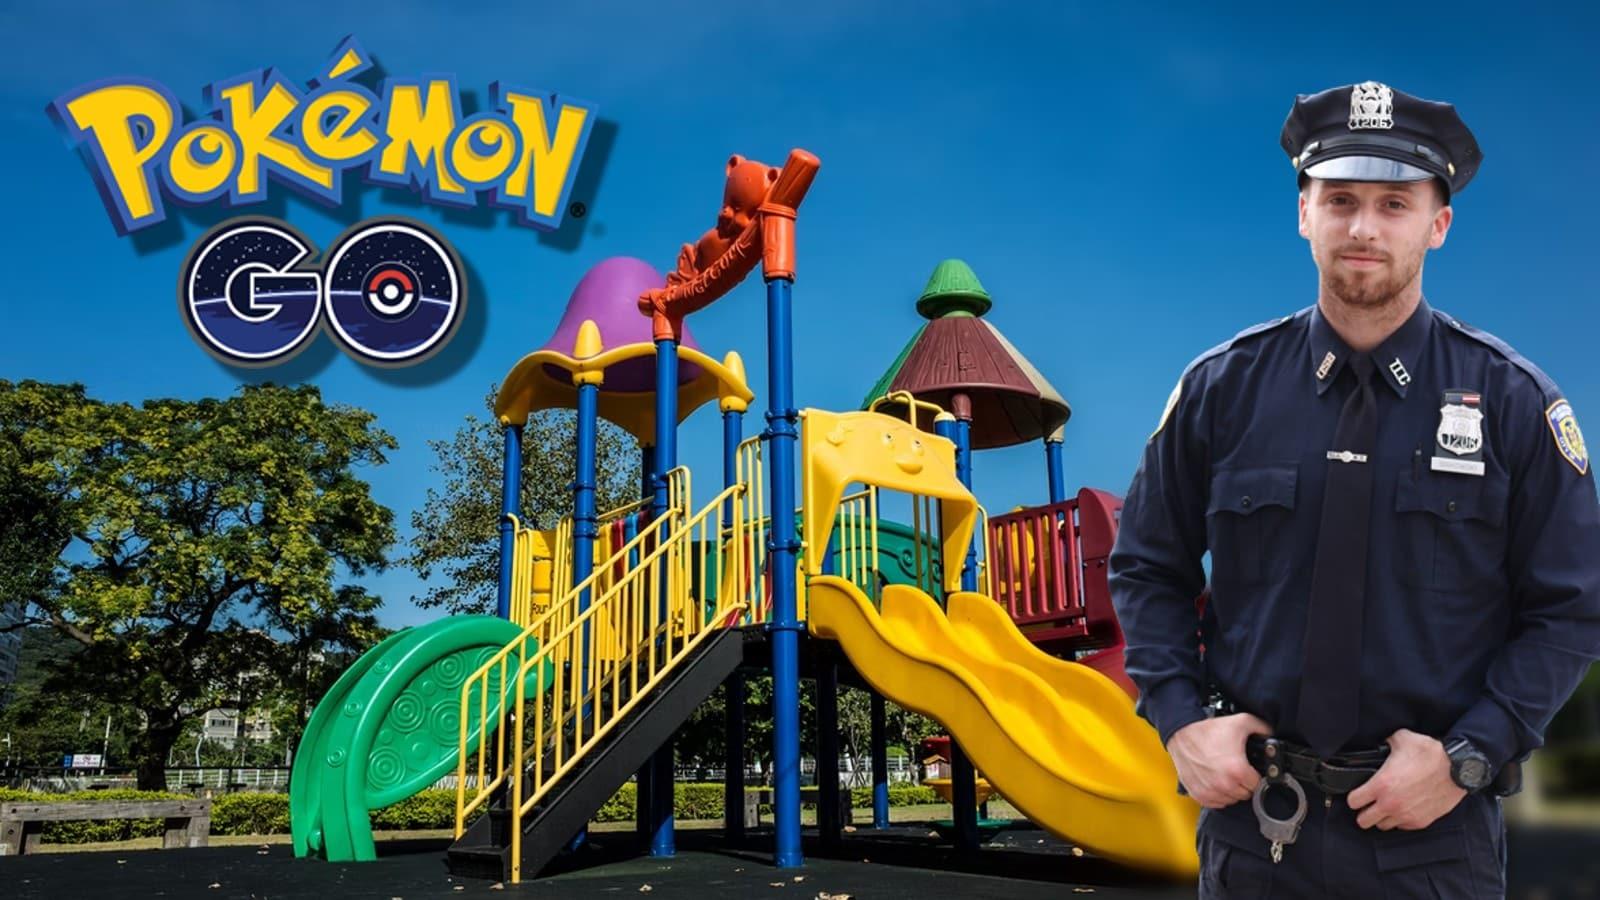 Pokemon GO players at a playground